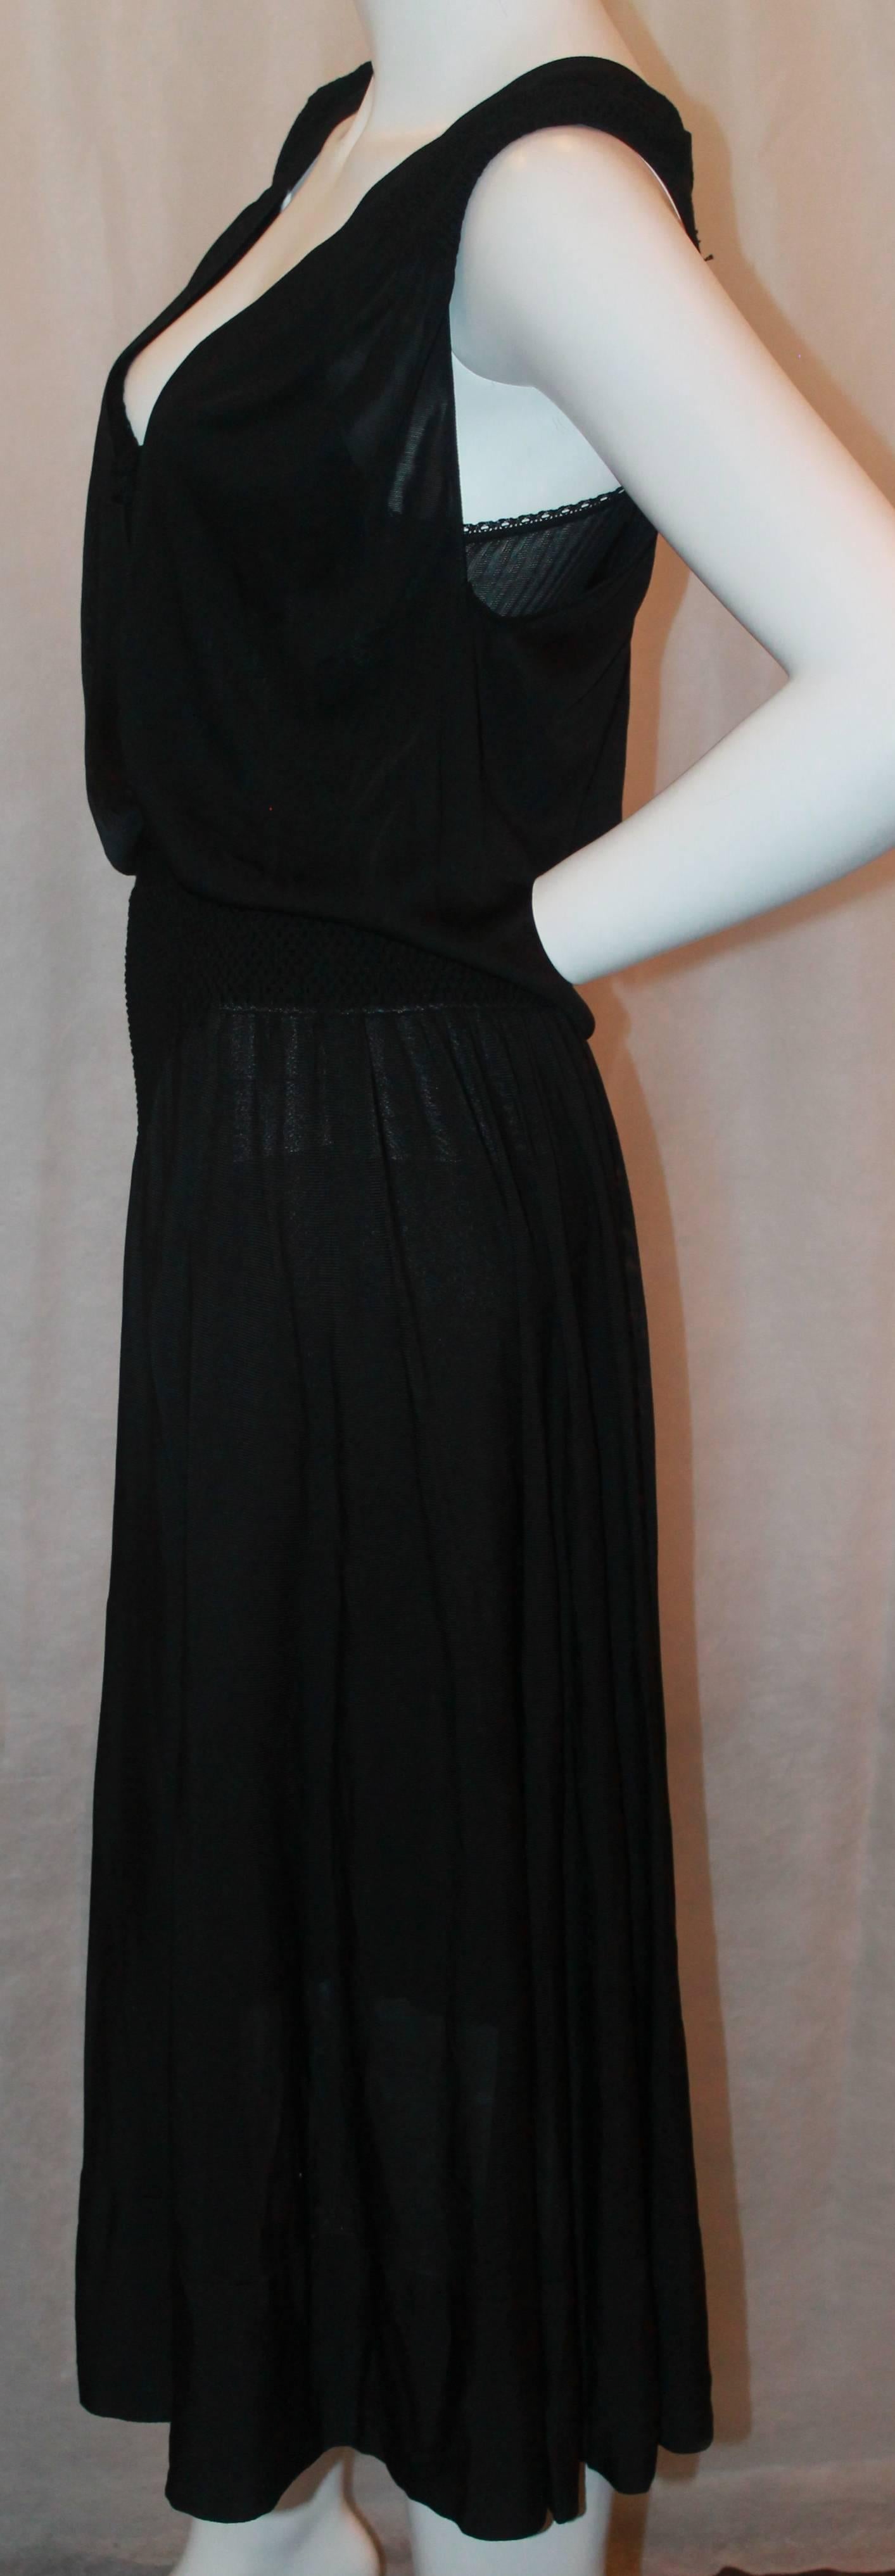 Chanel Black Silk Knit Dress w/ slip knit slip - 2008 - 42 - NWT.  This dress and slip set is in excellent condition.  The dress is a bit sheer; it has a deep 